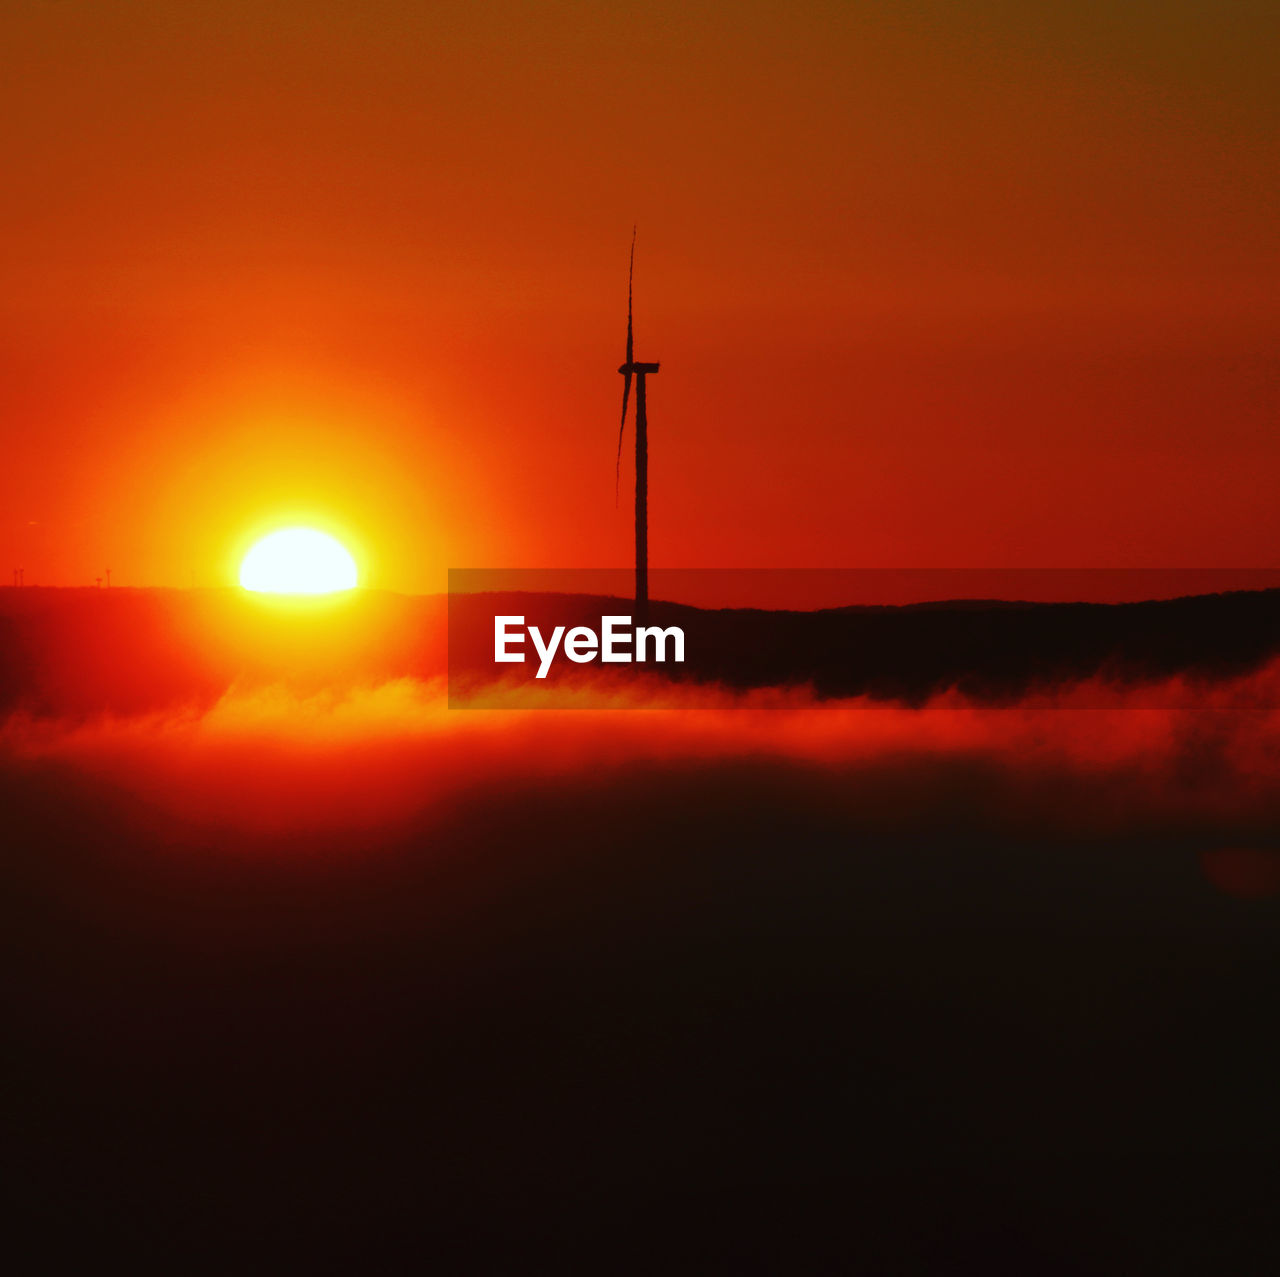 SILHOUETTE OF WIND TURBINES DURING SUNSET